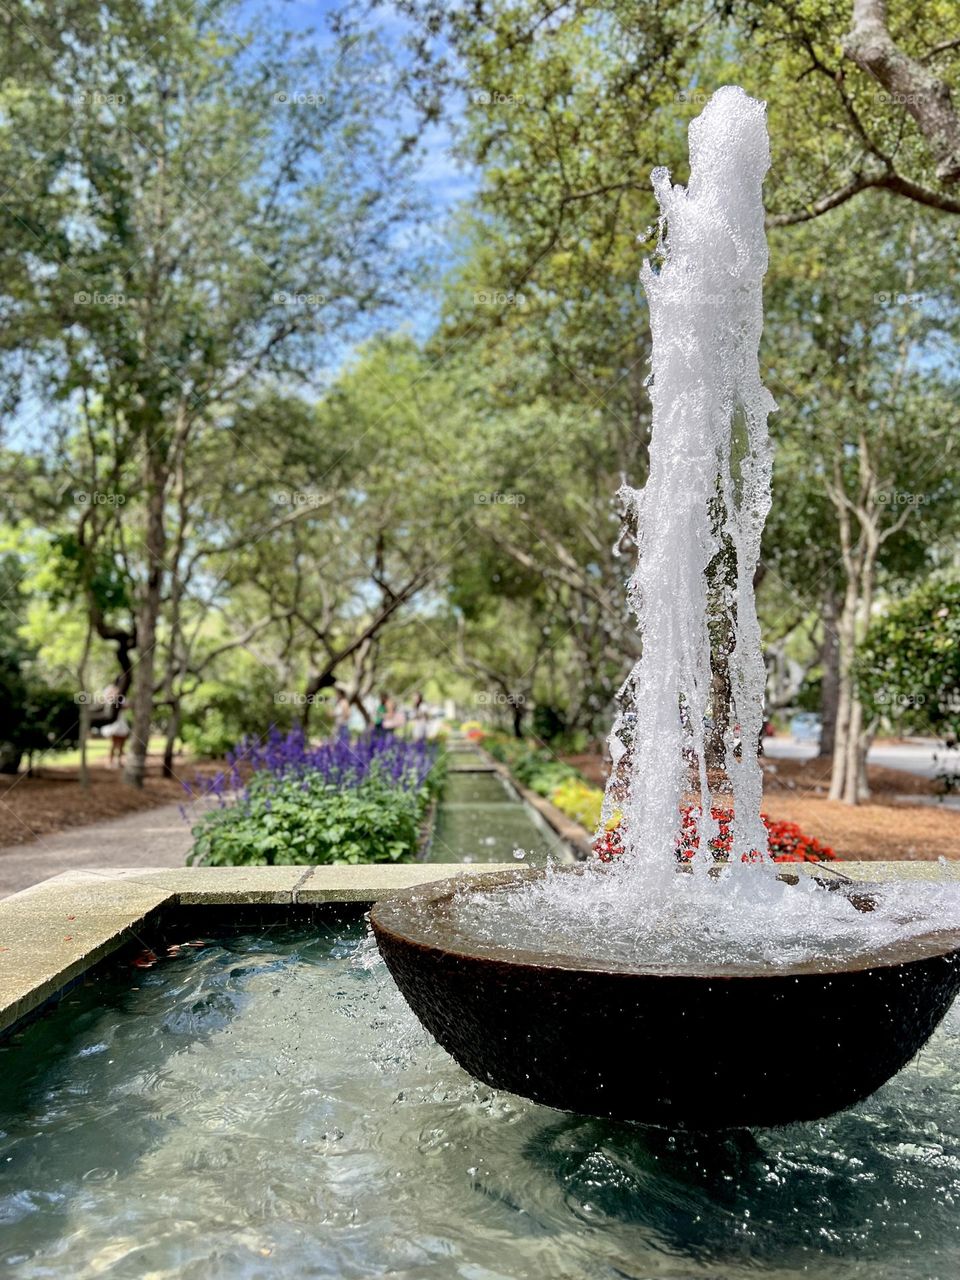 Bubbling fountain in foreground on a sunny day. Background in city park with trees, gravel walking path, and spring blooming plants.